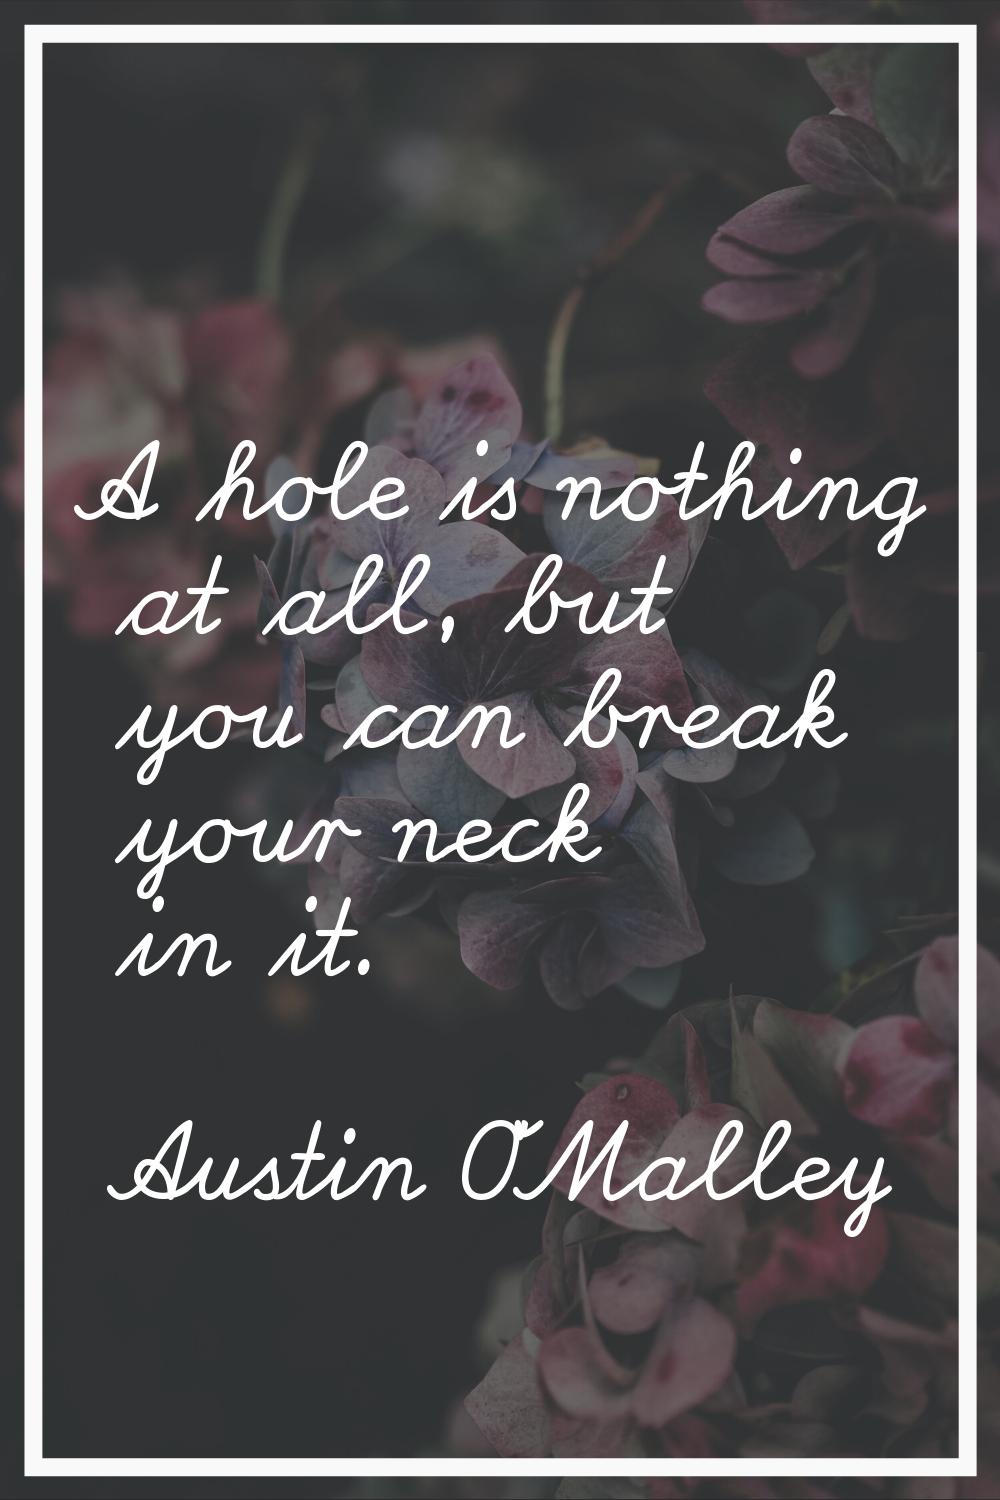 A hole is nothing at all, but you can break your neck in it.